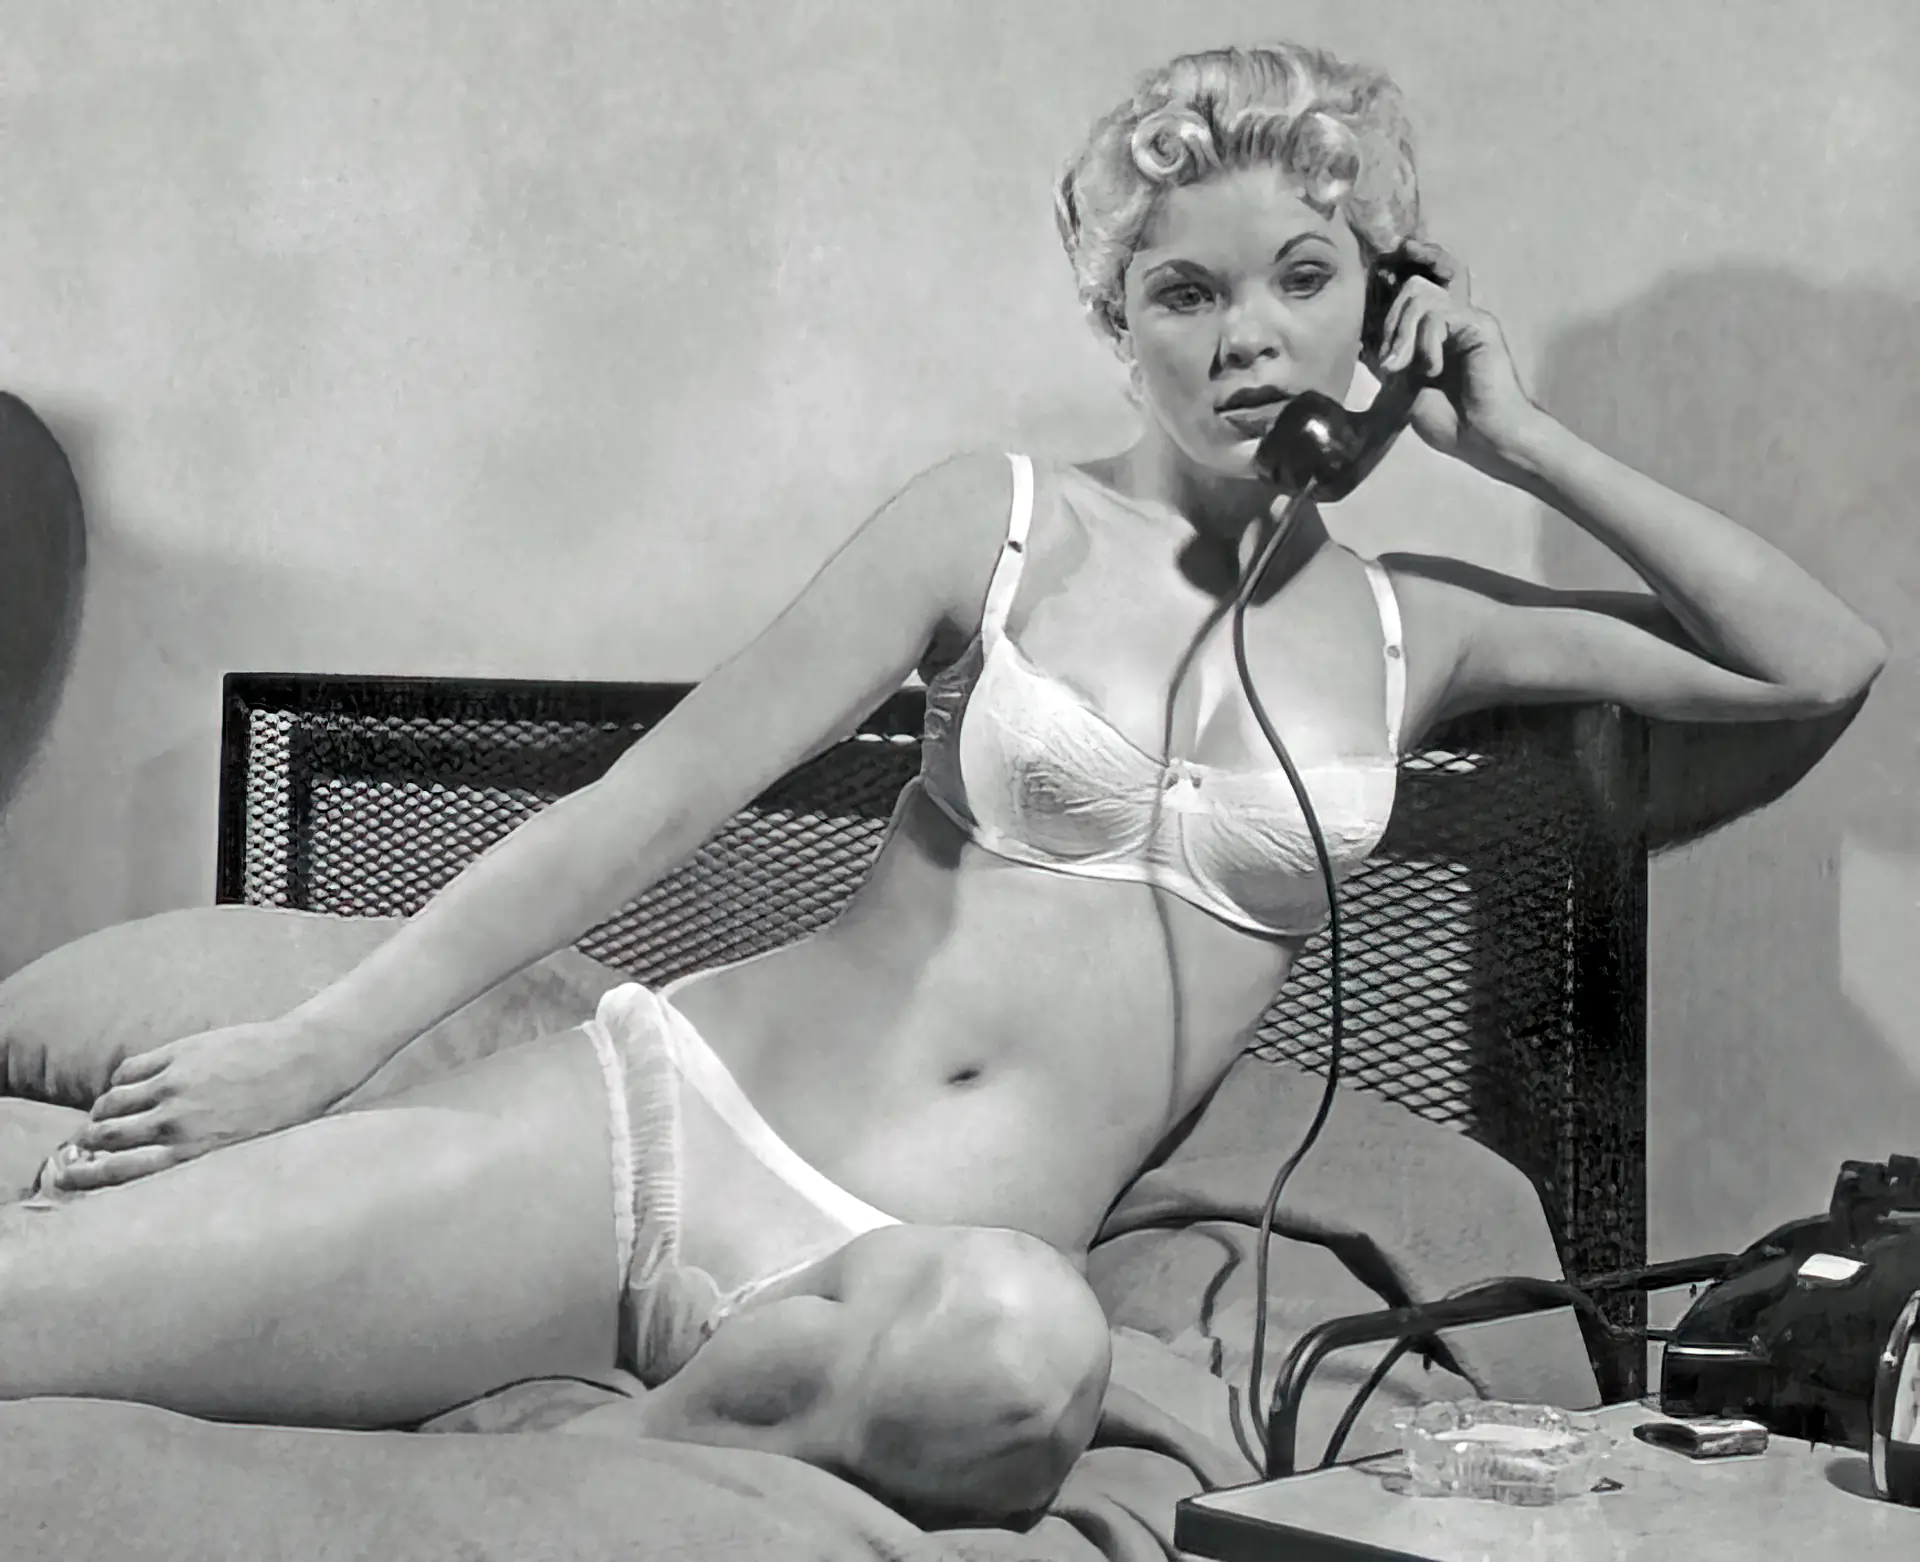 Dreamy Candy Barr talks on the phone in her white lingerie